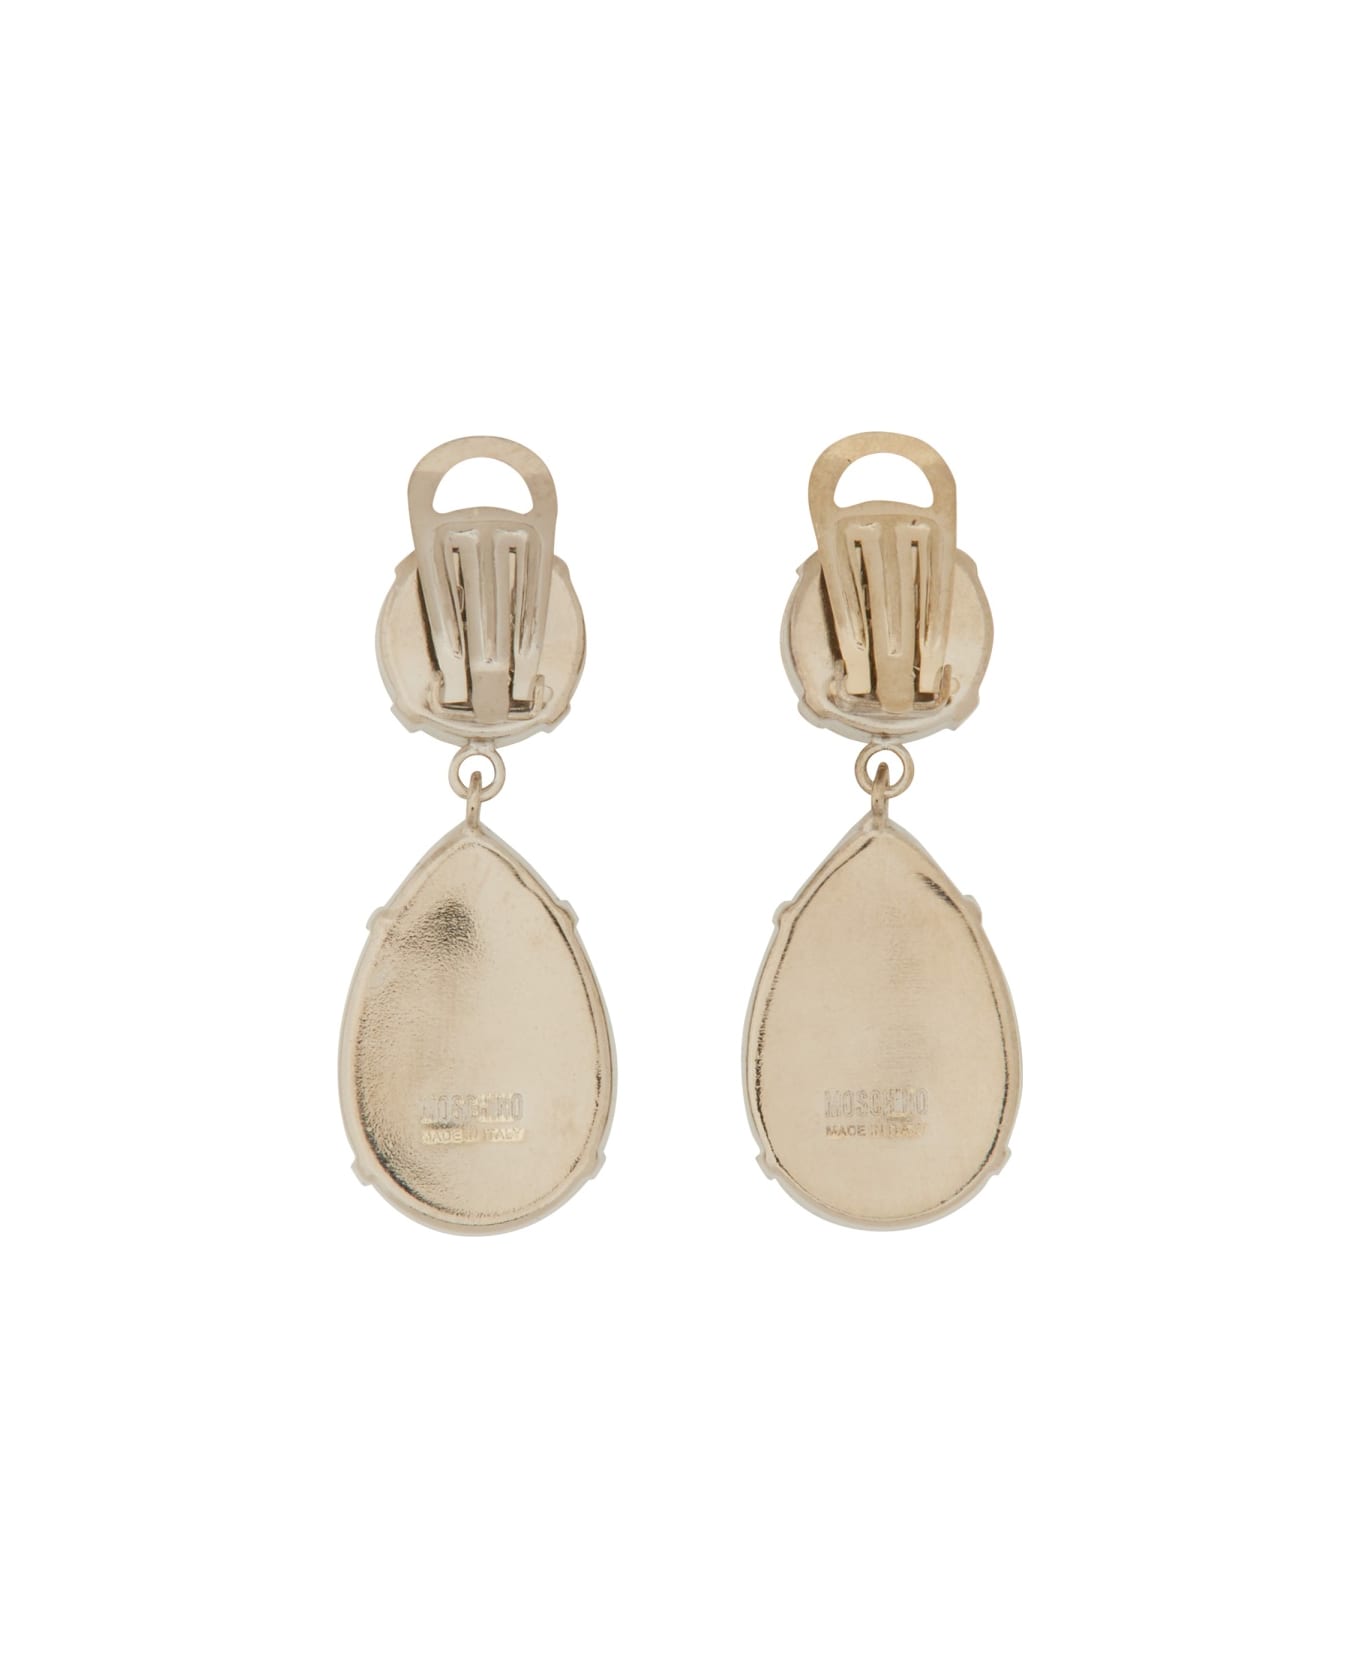 Moschino Pendant Earrings With Jewel Stones - SILVER